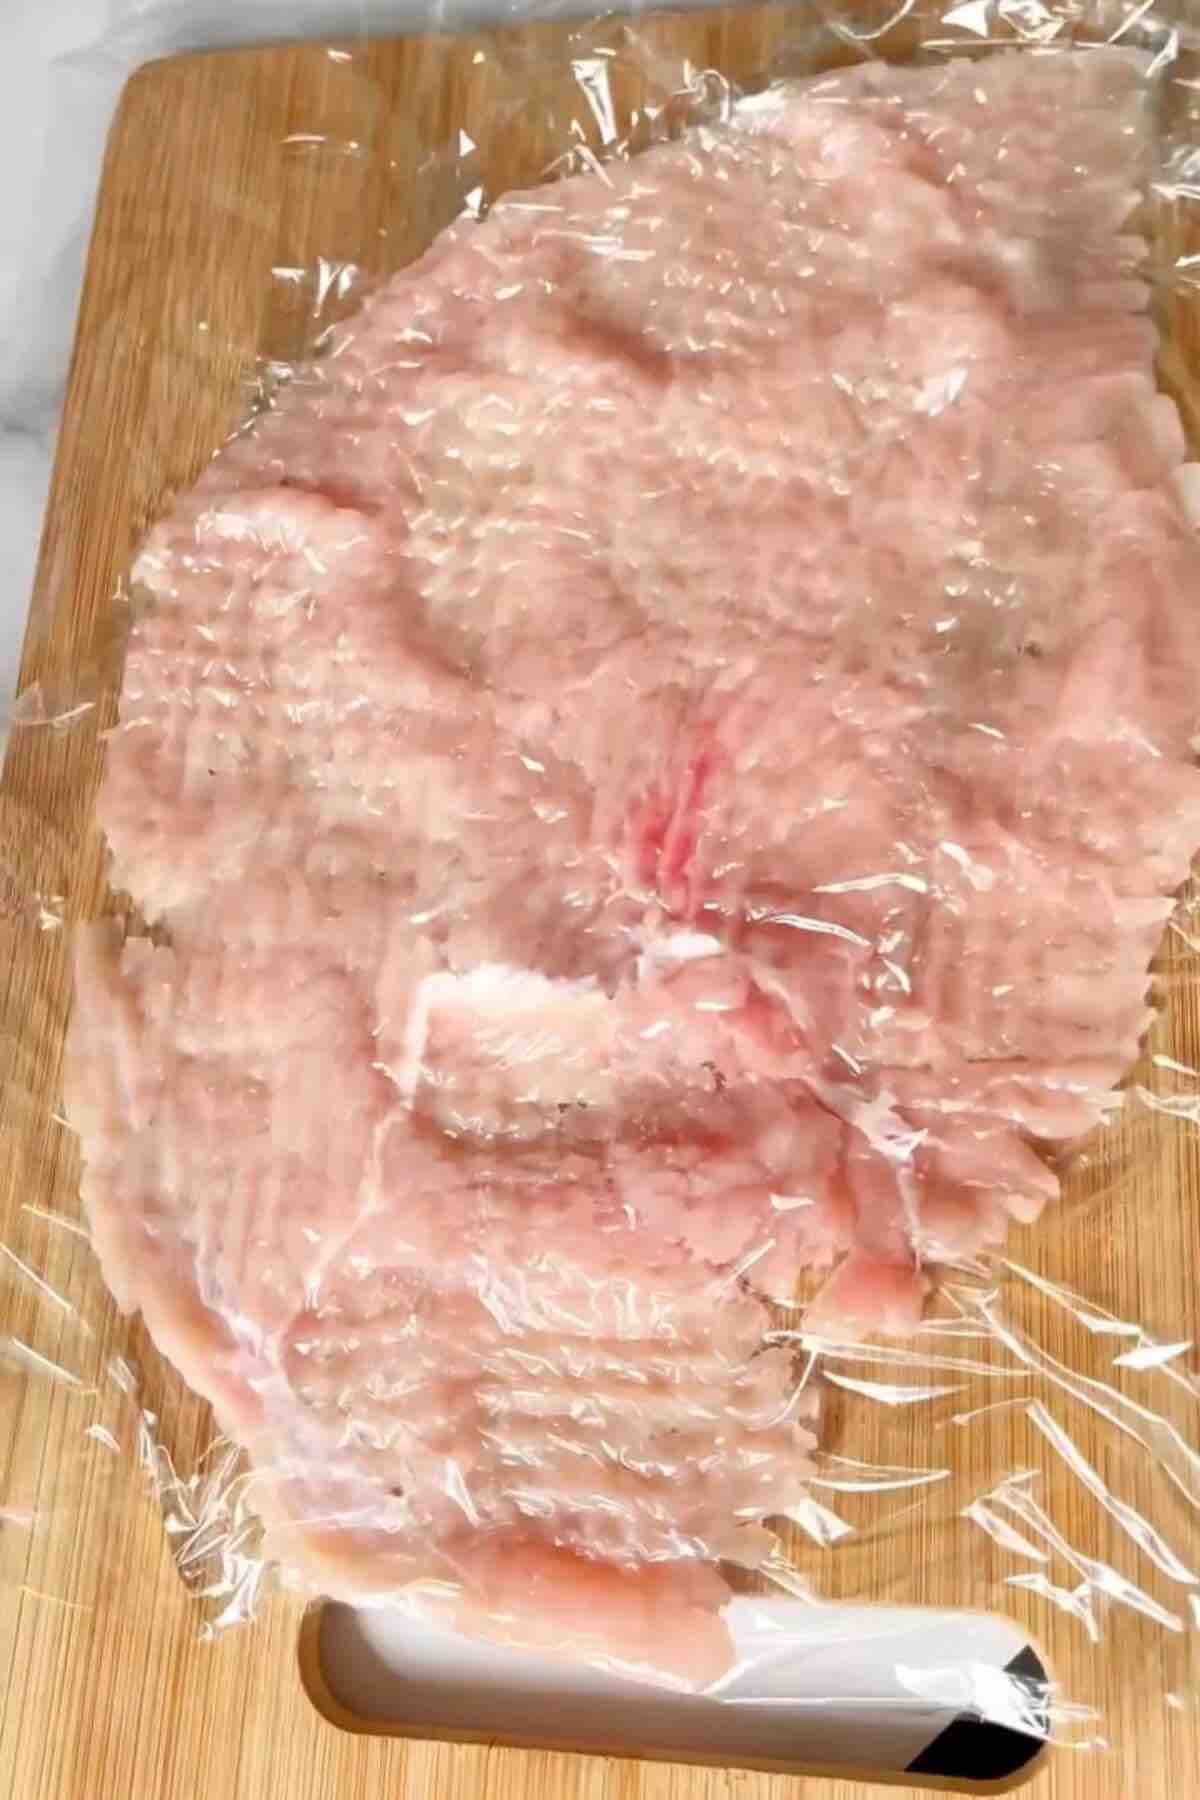 A tenderized piece of chicken breast, flattened and ready for cooking.